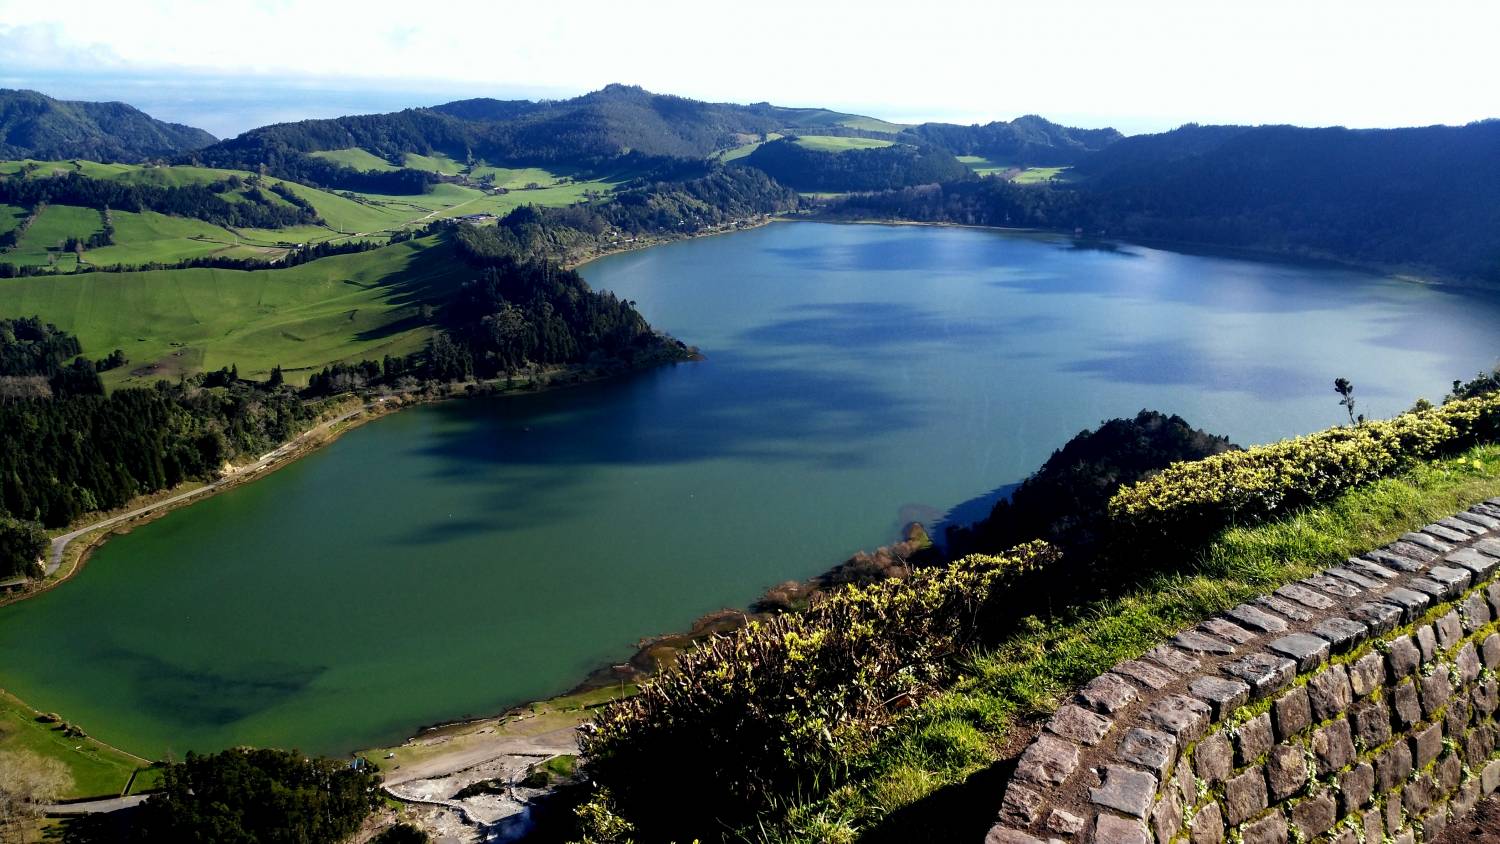 Azores Full Day Sightseeing Tour Visit The Furnas And The Northeast Of São Miguel Island